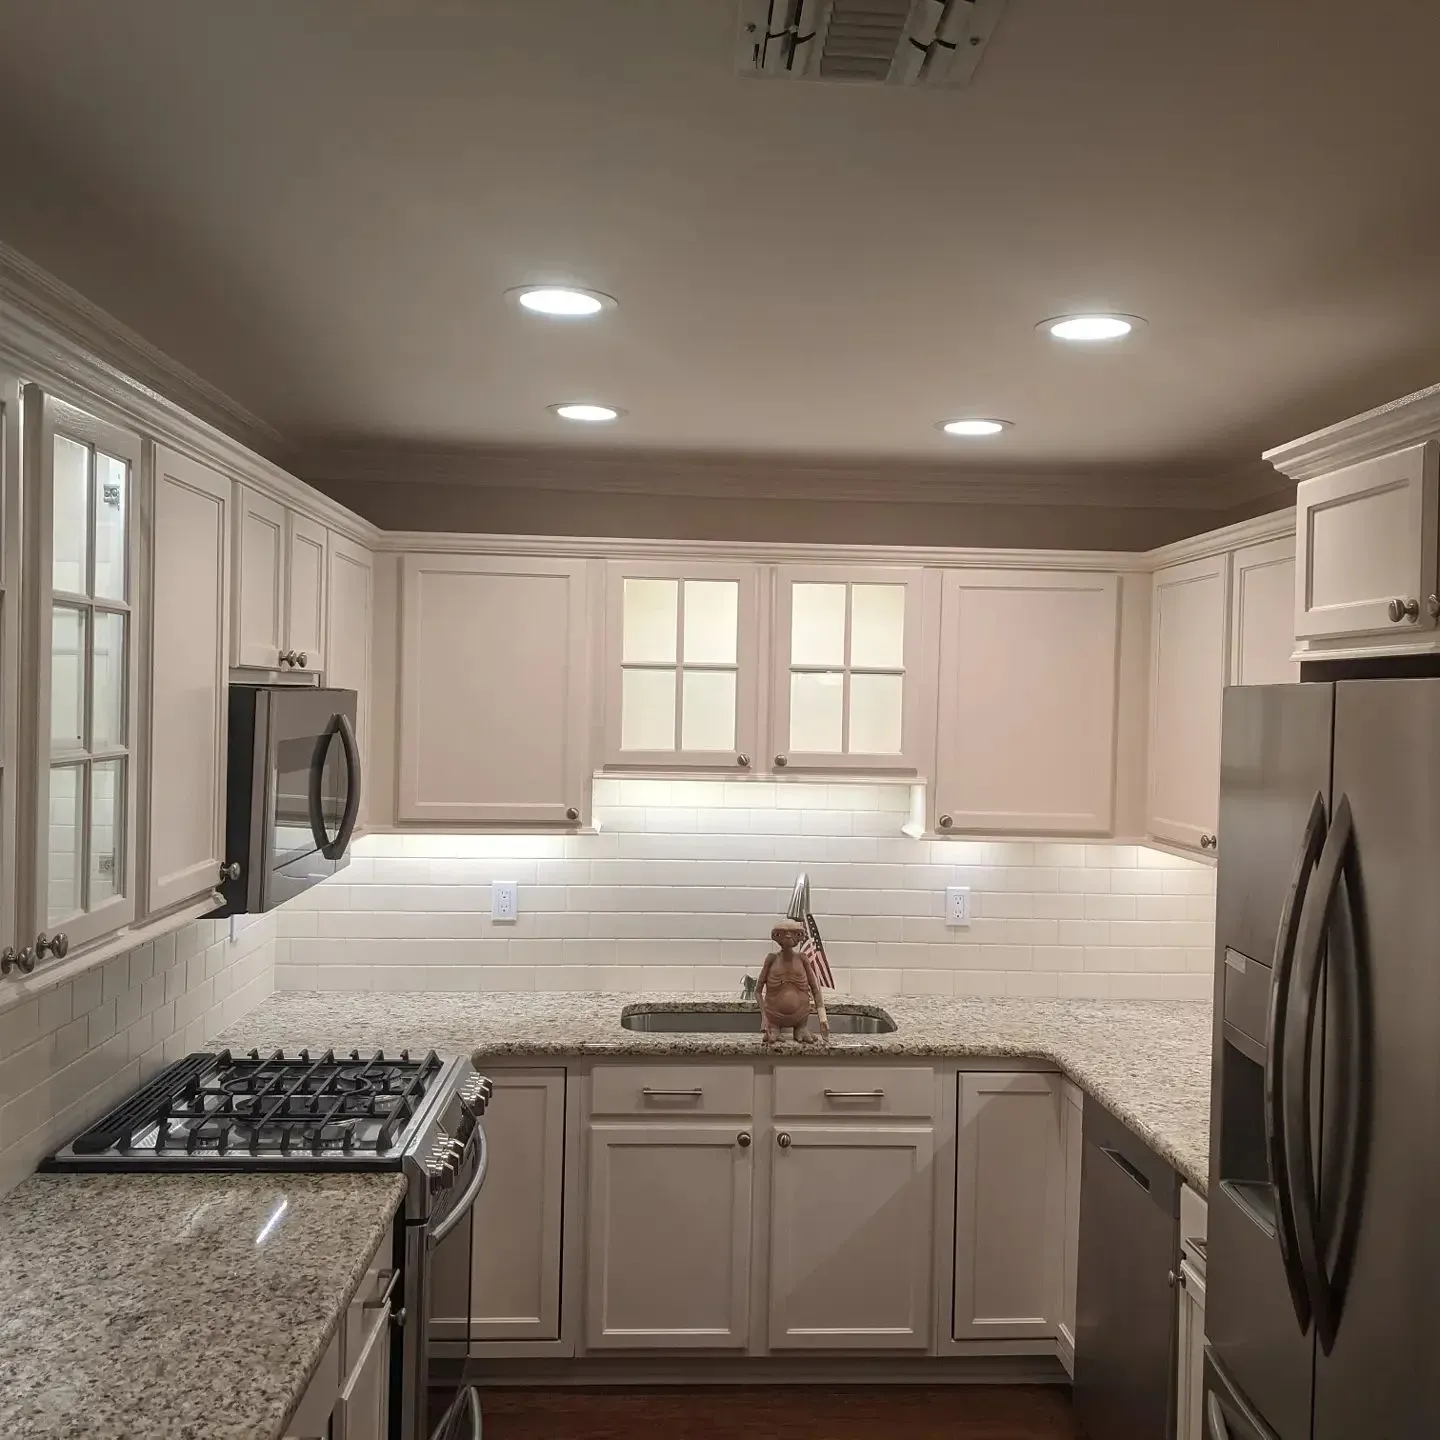 Benjamin Moore Timid White kitchen cabinets paint